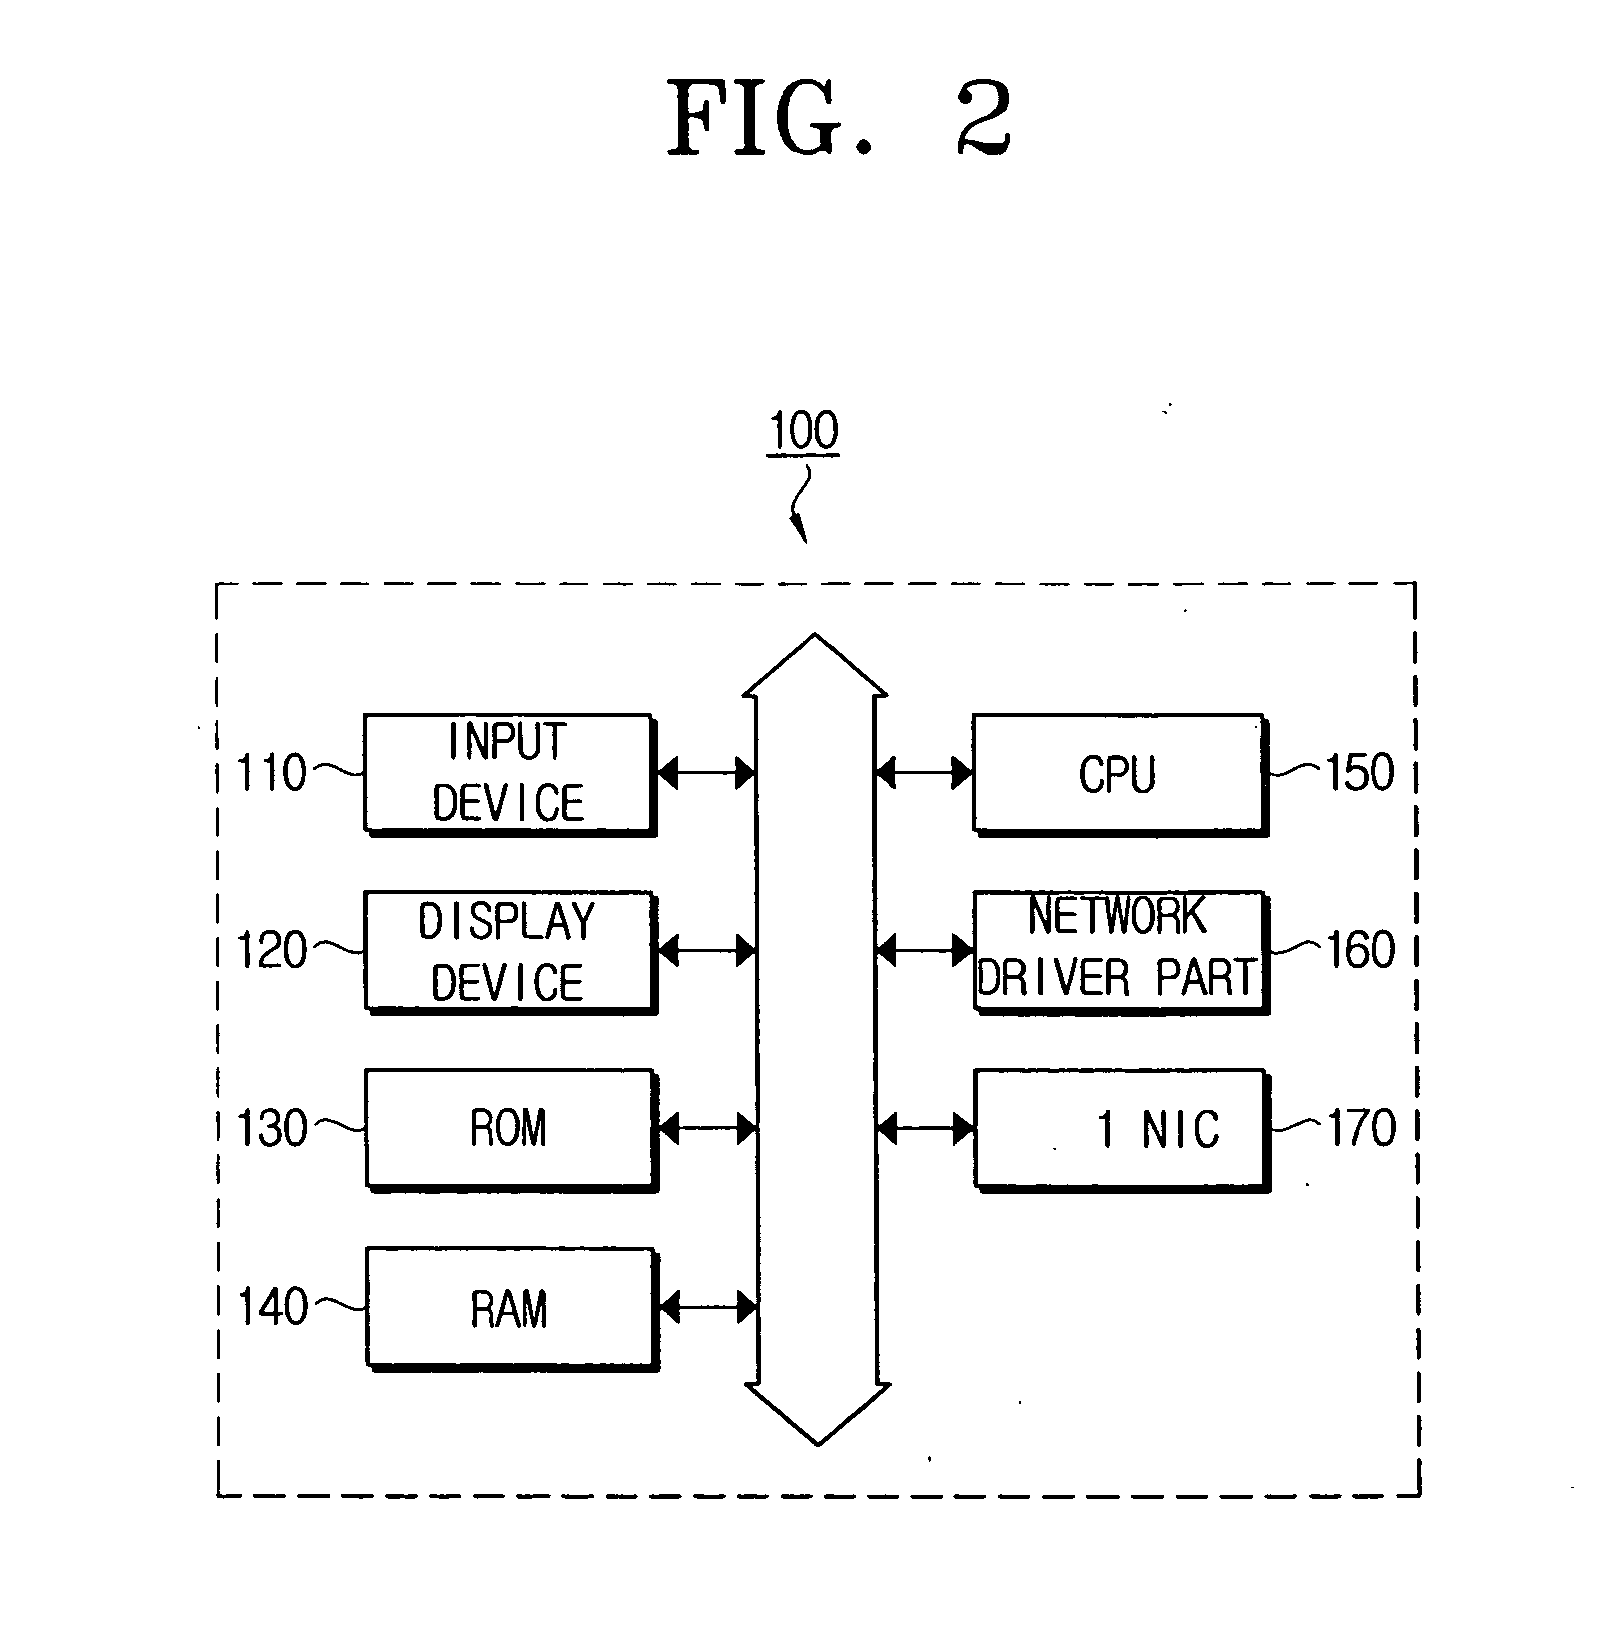 Network system and a method for registering an abbreviated number thereof